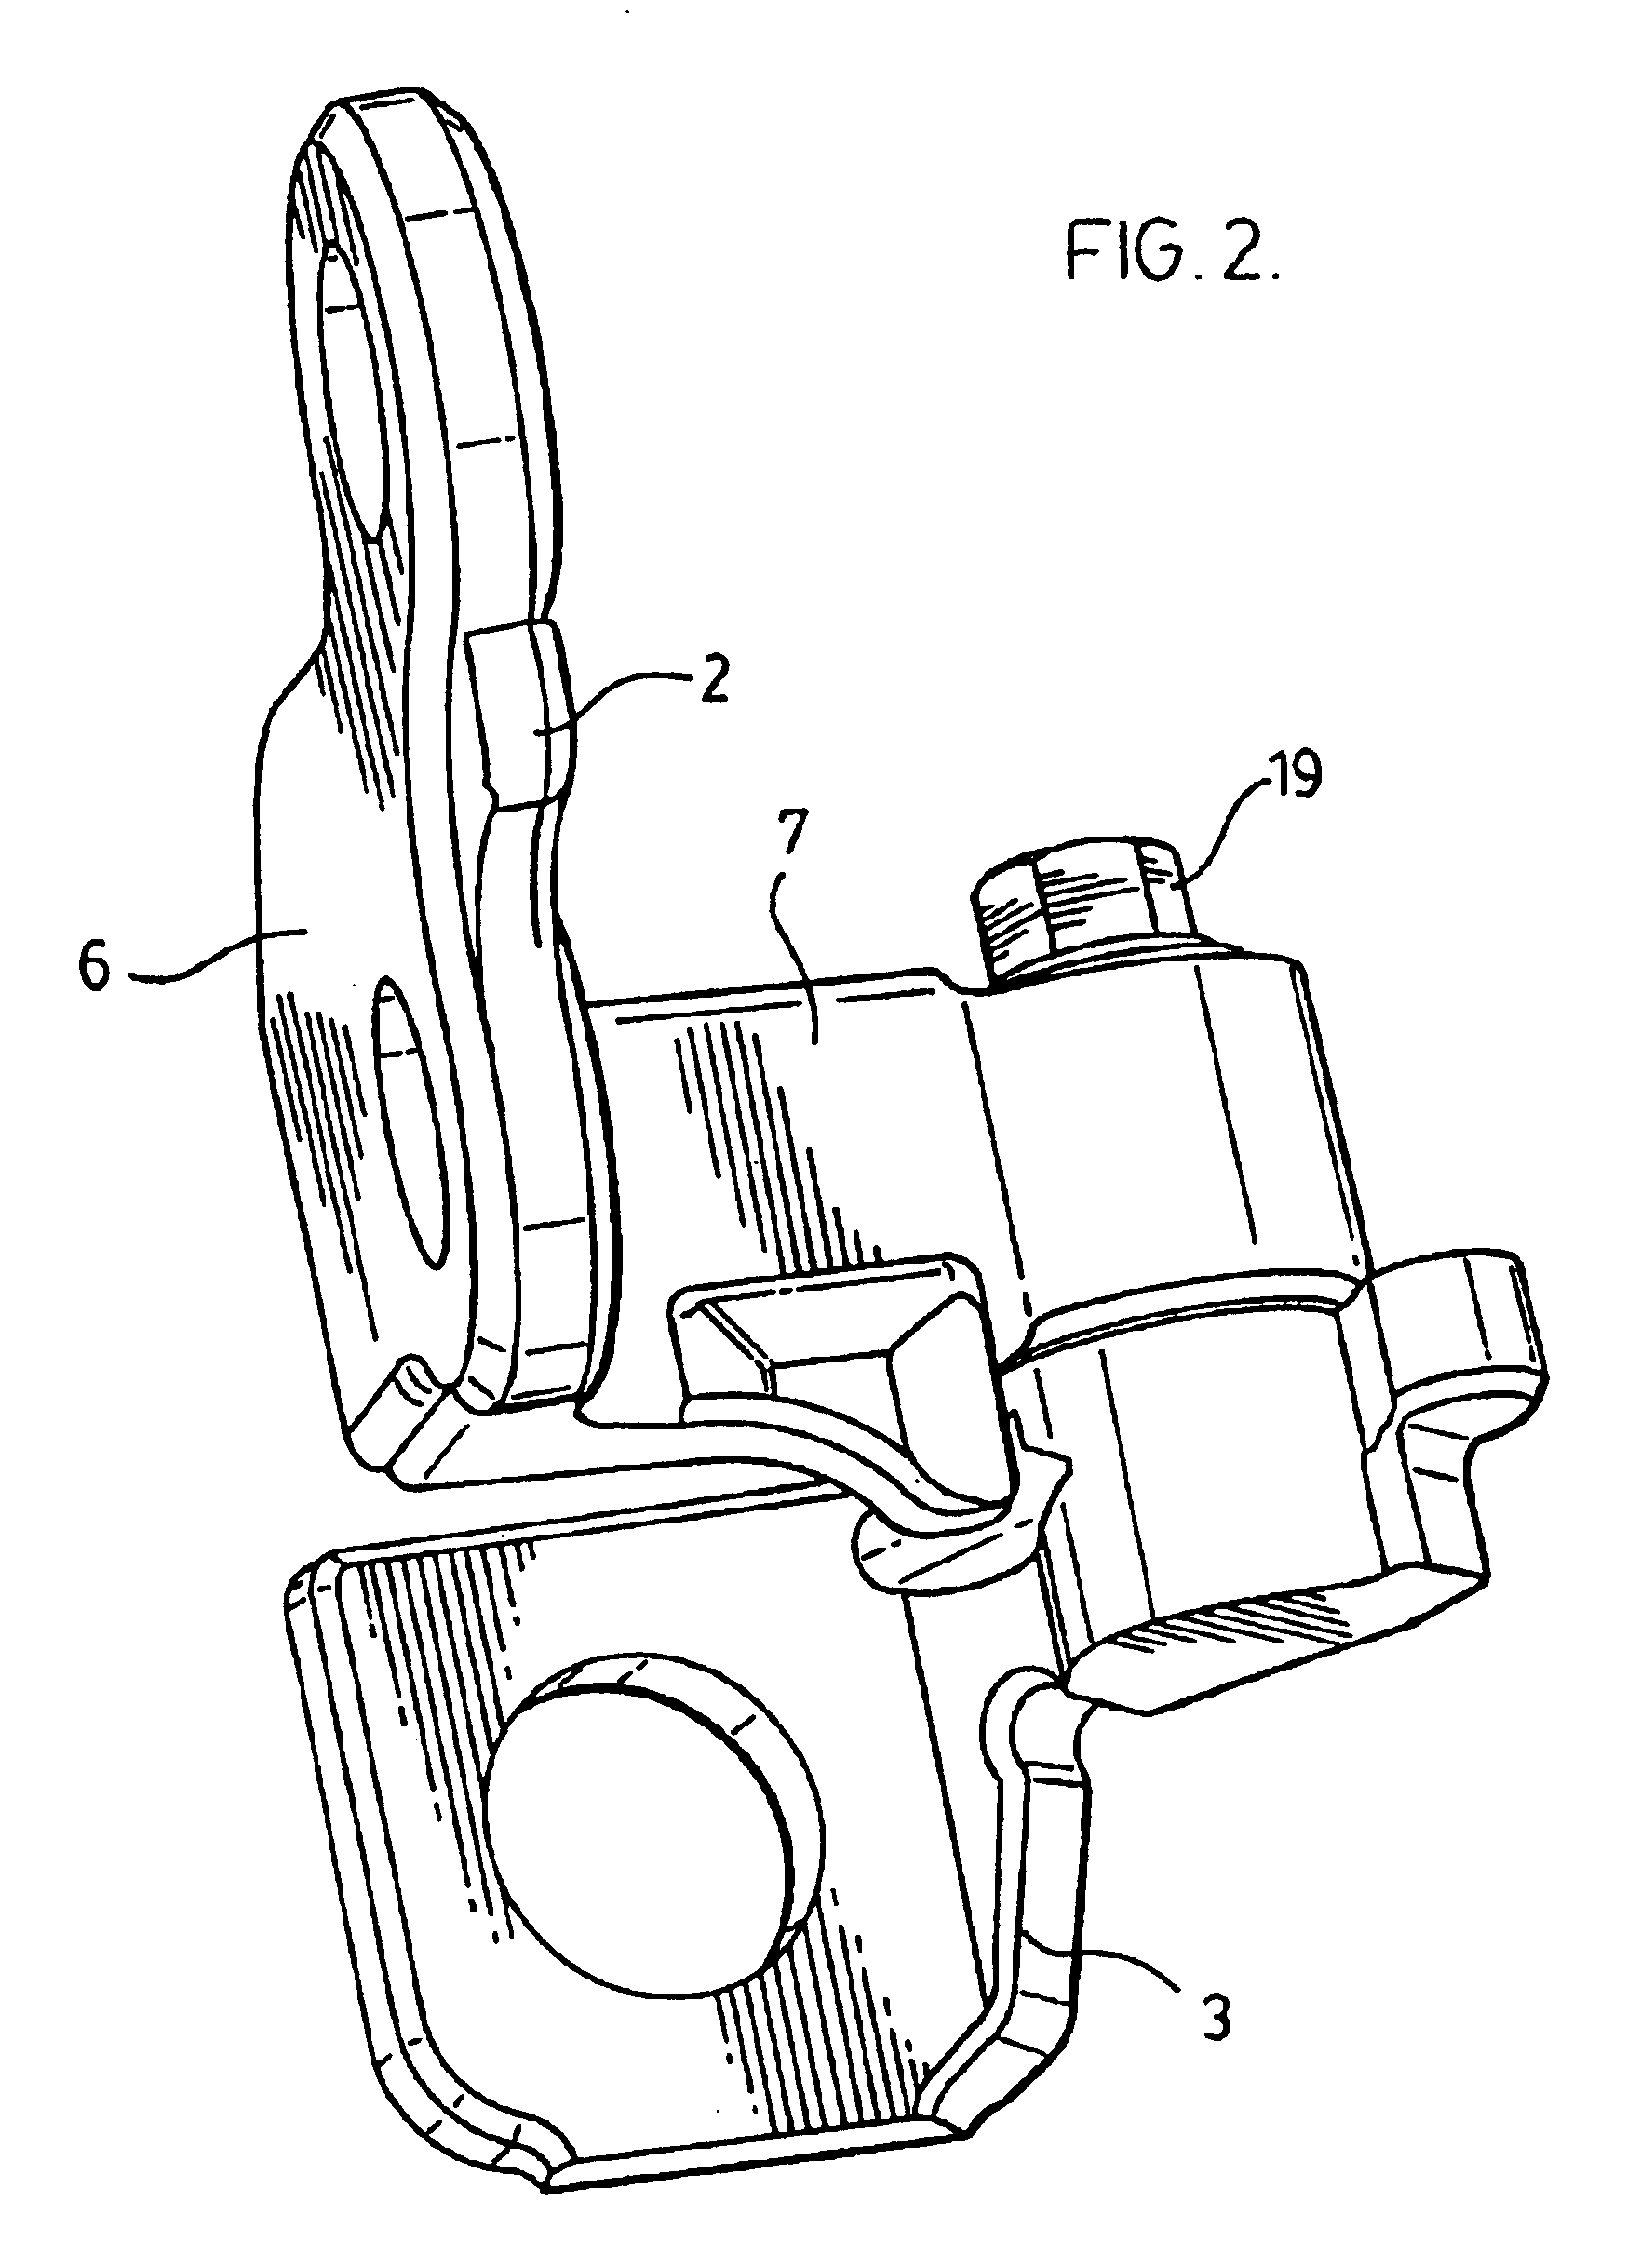 Automotive door hinge with structurally integrated pivot